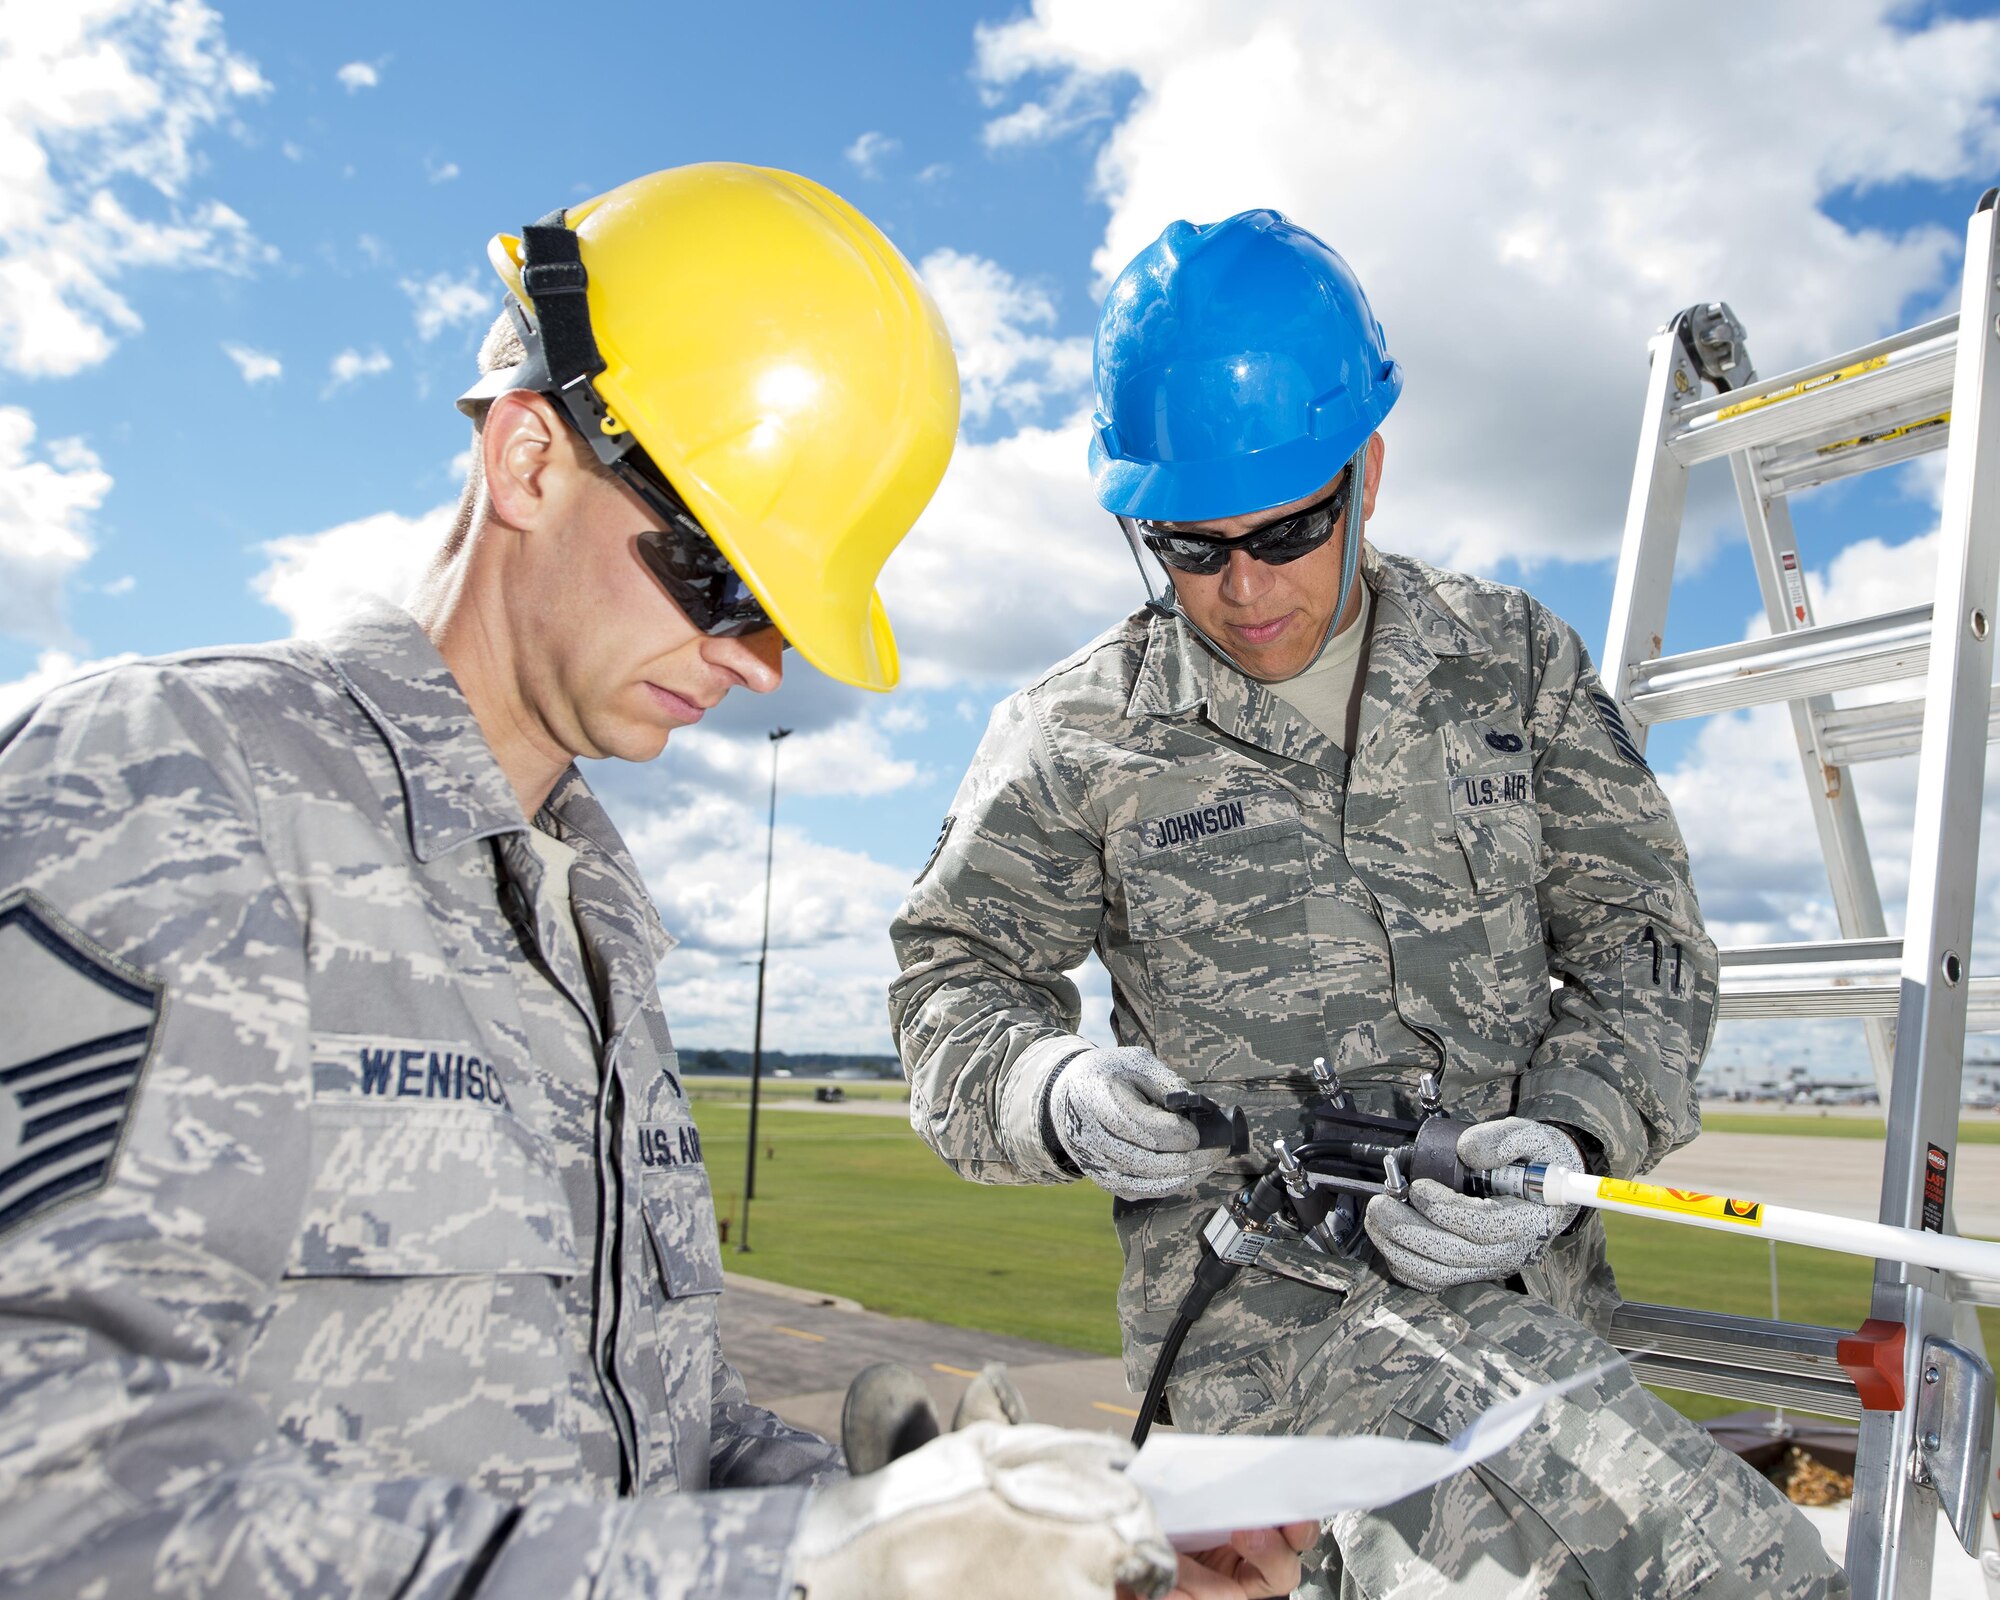 U.S. Air Force Airmen from the 210th Engineering Installation Squadron add an antenna to a newly installed Giant Voice stack located on the roof of the Small Air Terminal at the 133rd Airlift Wing in St. Paul, Minn., June 19, 2017. Once complete, the system will provide improved emergency notification capabilities to flight line and maintenance personnel while aircraft engines are running. Strobes will also light up on top of the stack as an added visual durning alerts.   
(U.S. Air National Guard photo by Tech. Sgt. Austen R. Adriaens/Released)